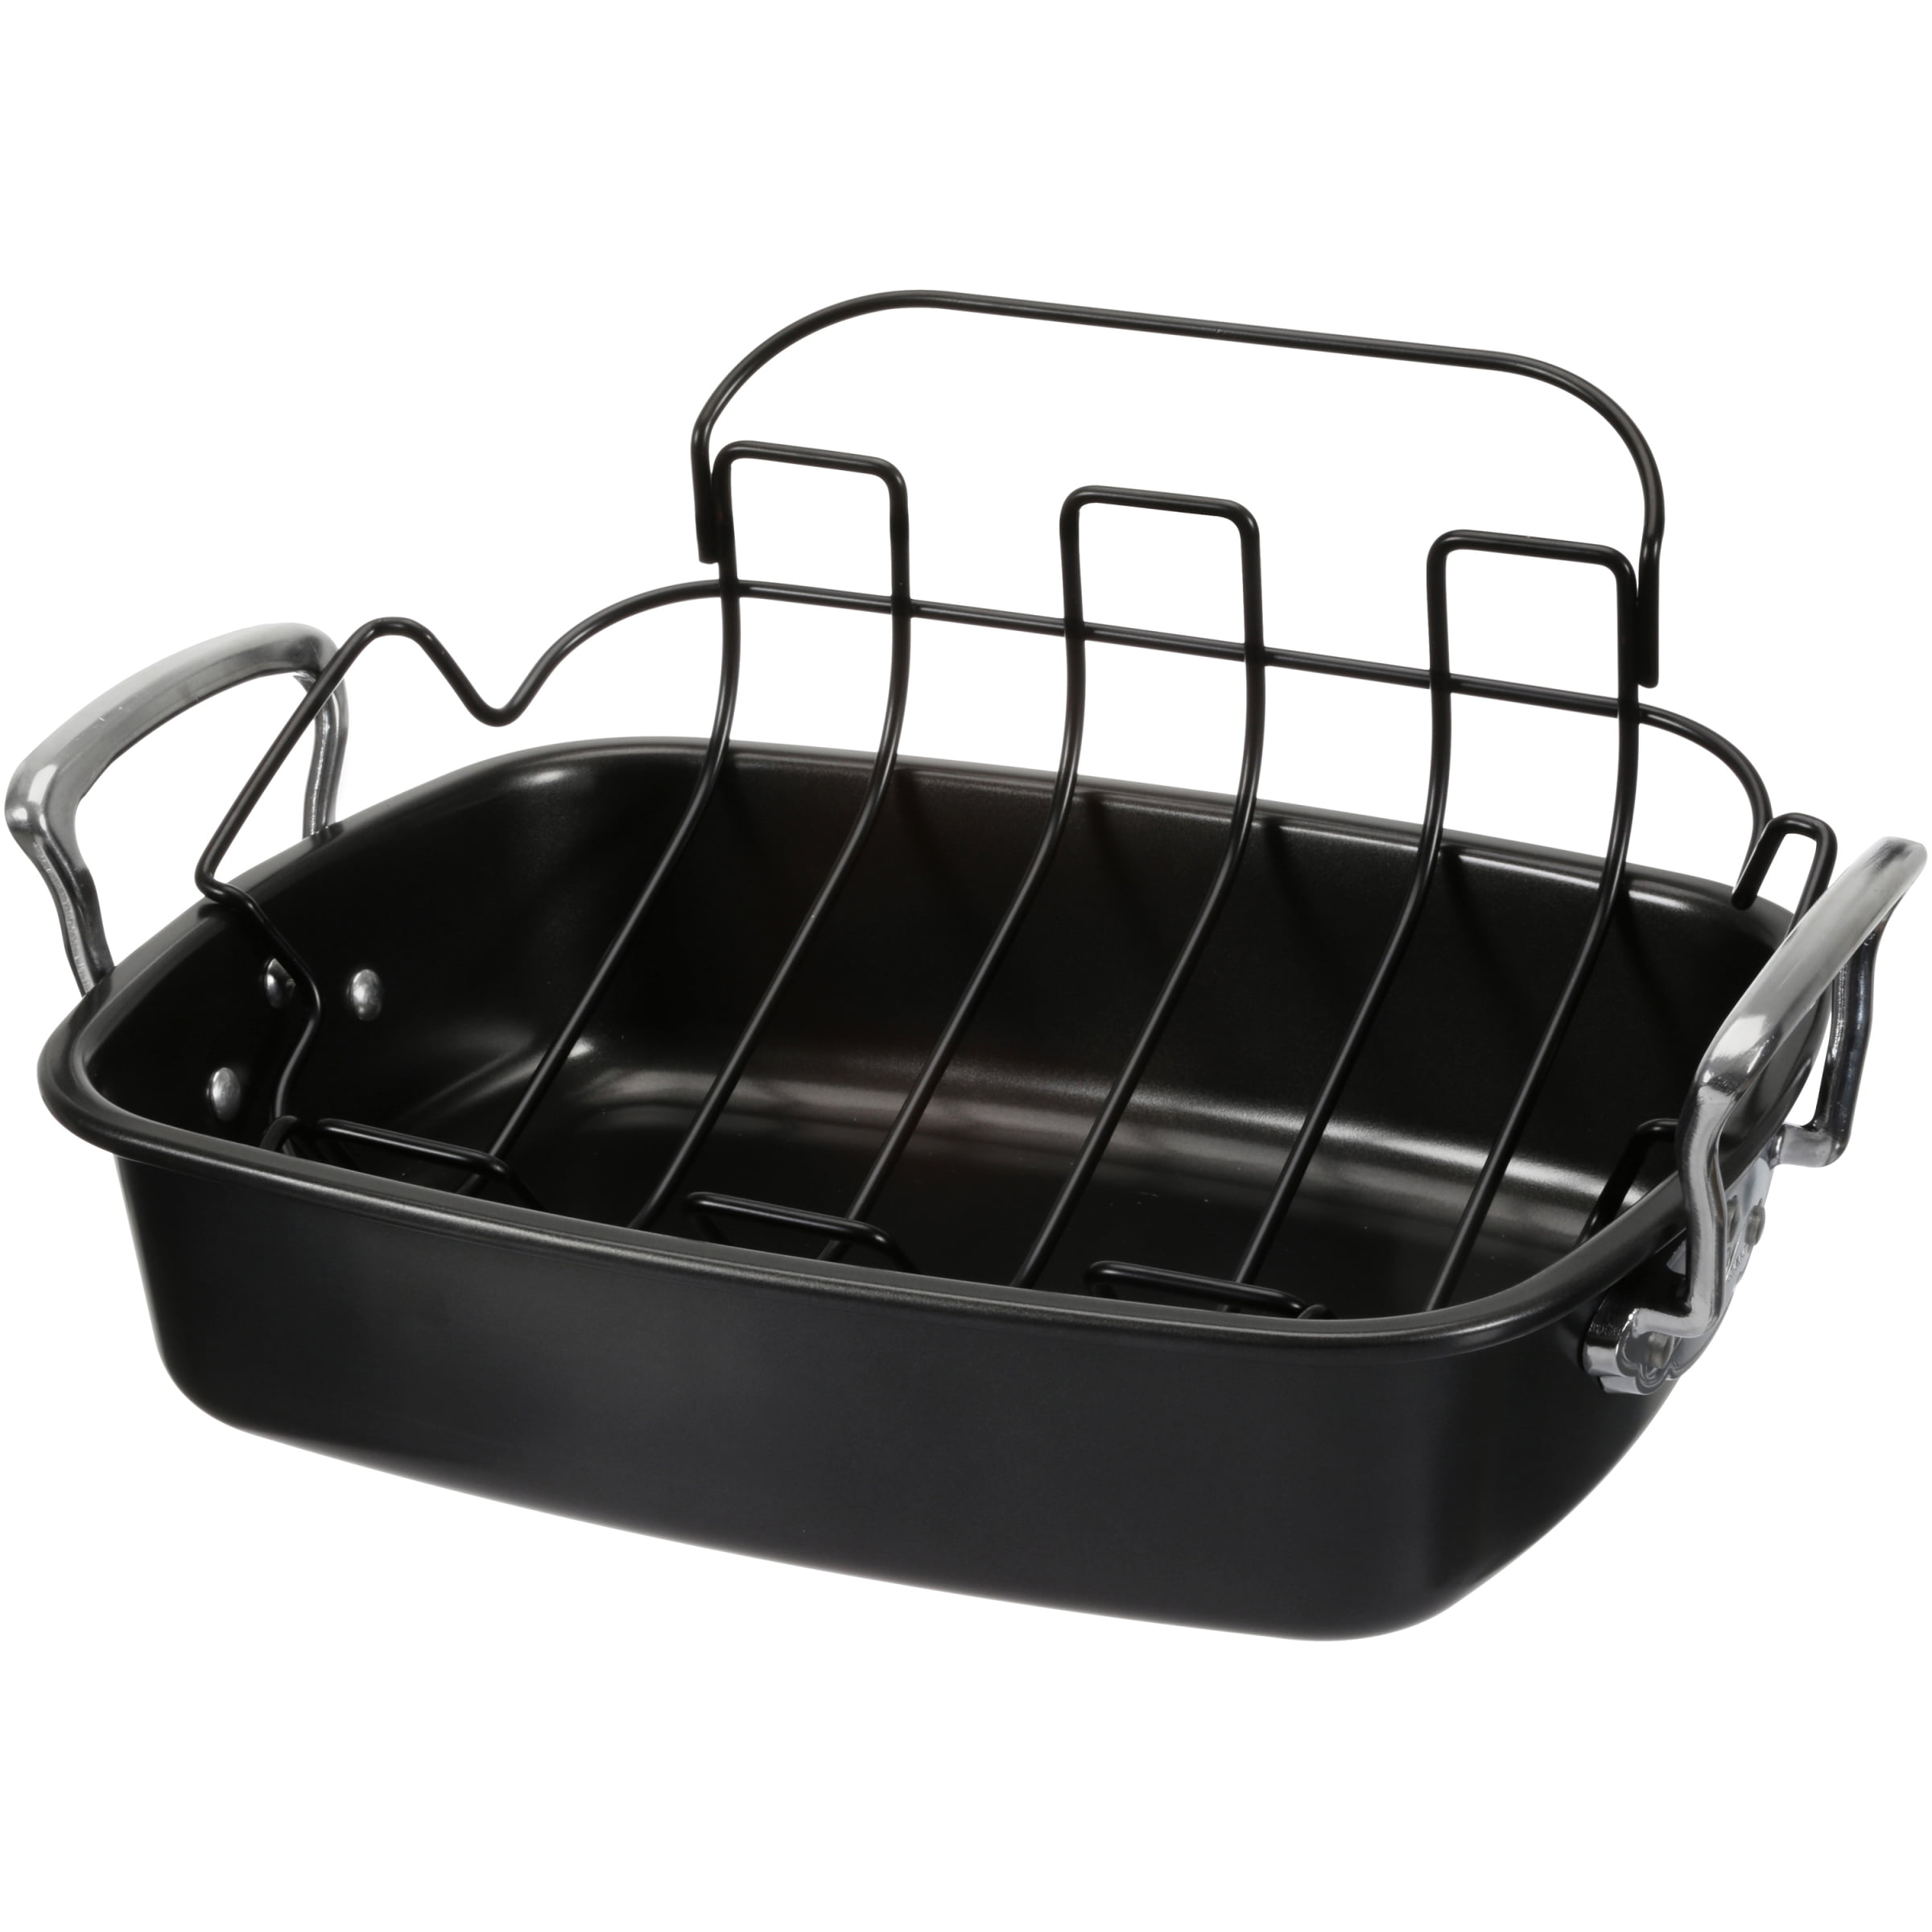 The Pioneer Woman Timeless Nonstick Roaster with Wire Rack Insert..